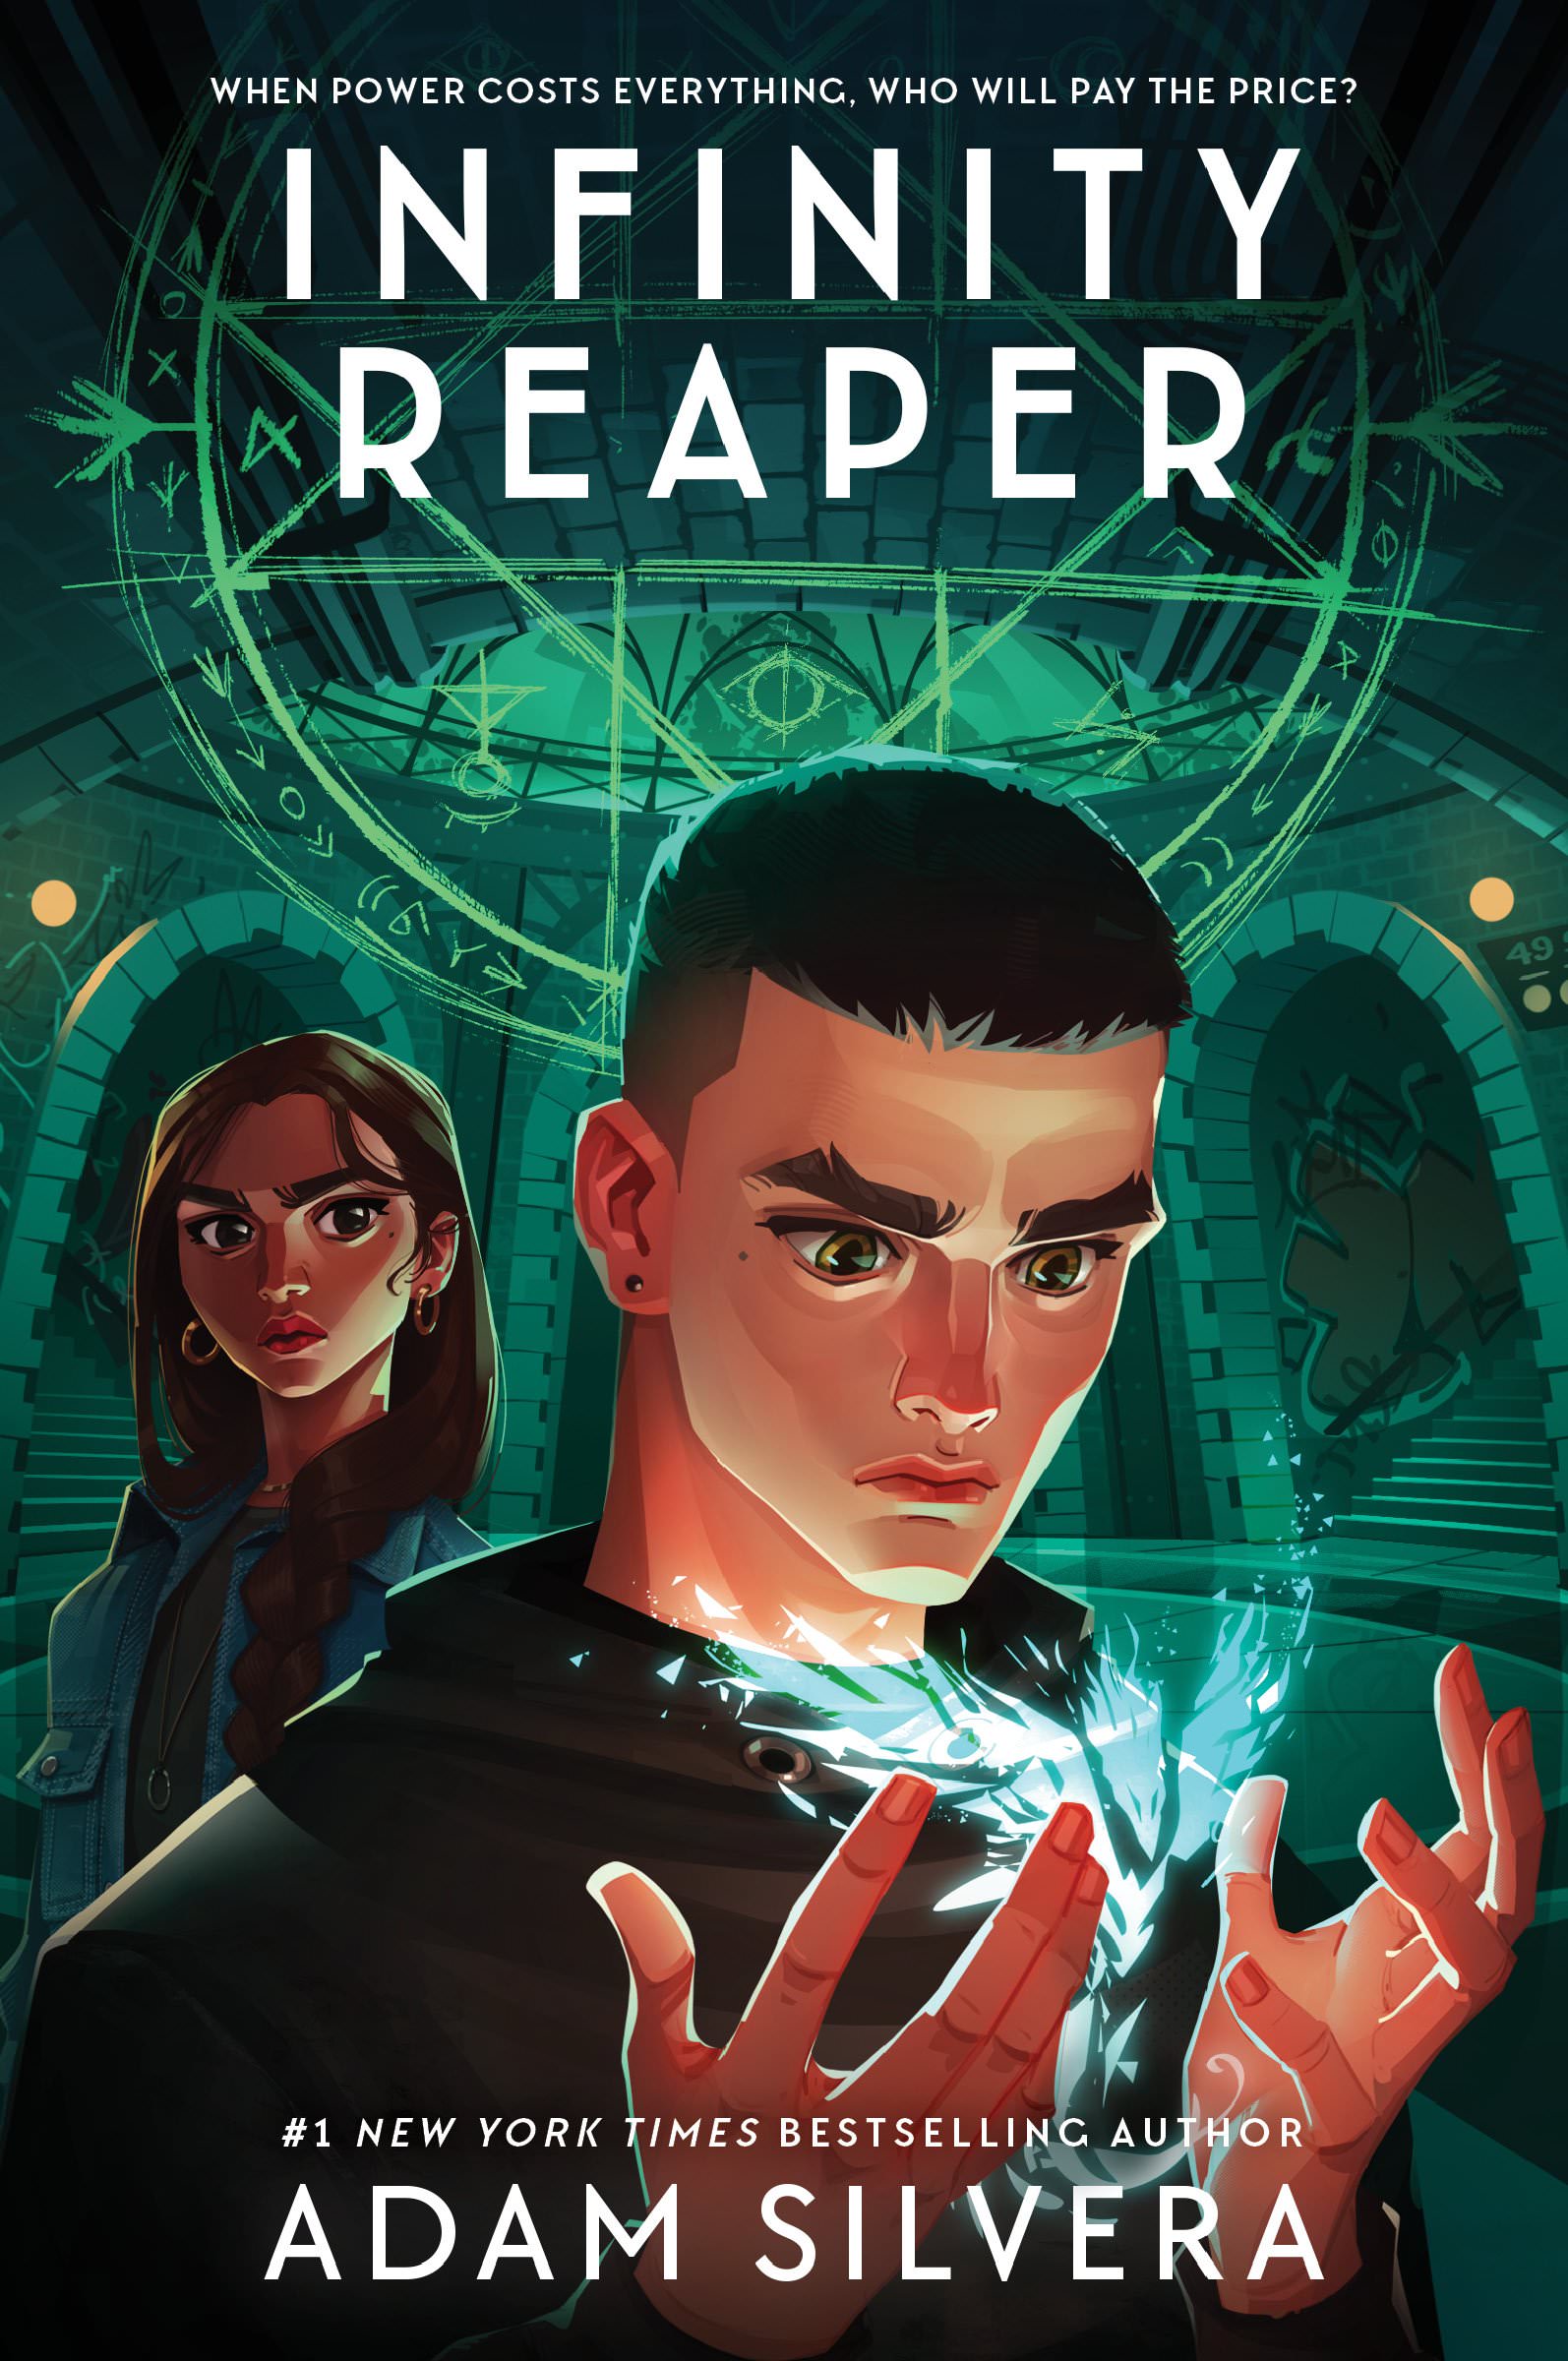 Infinity Reaper by Adam Silvera - Paperback Cover